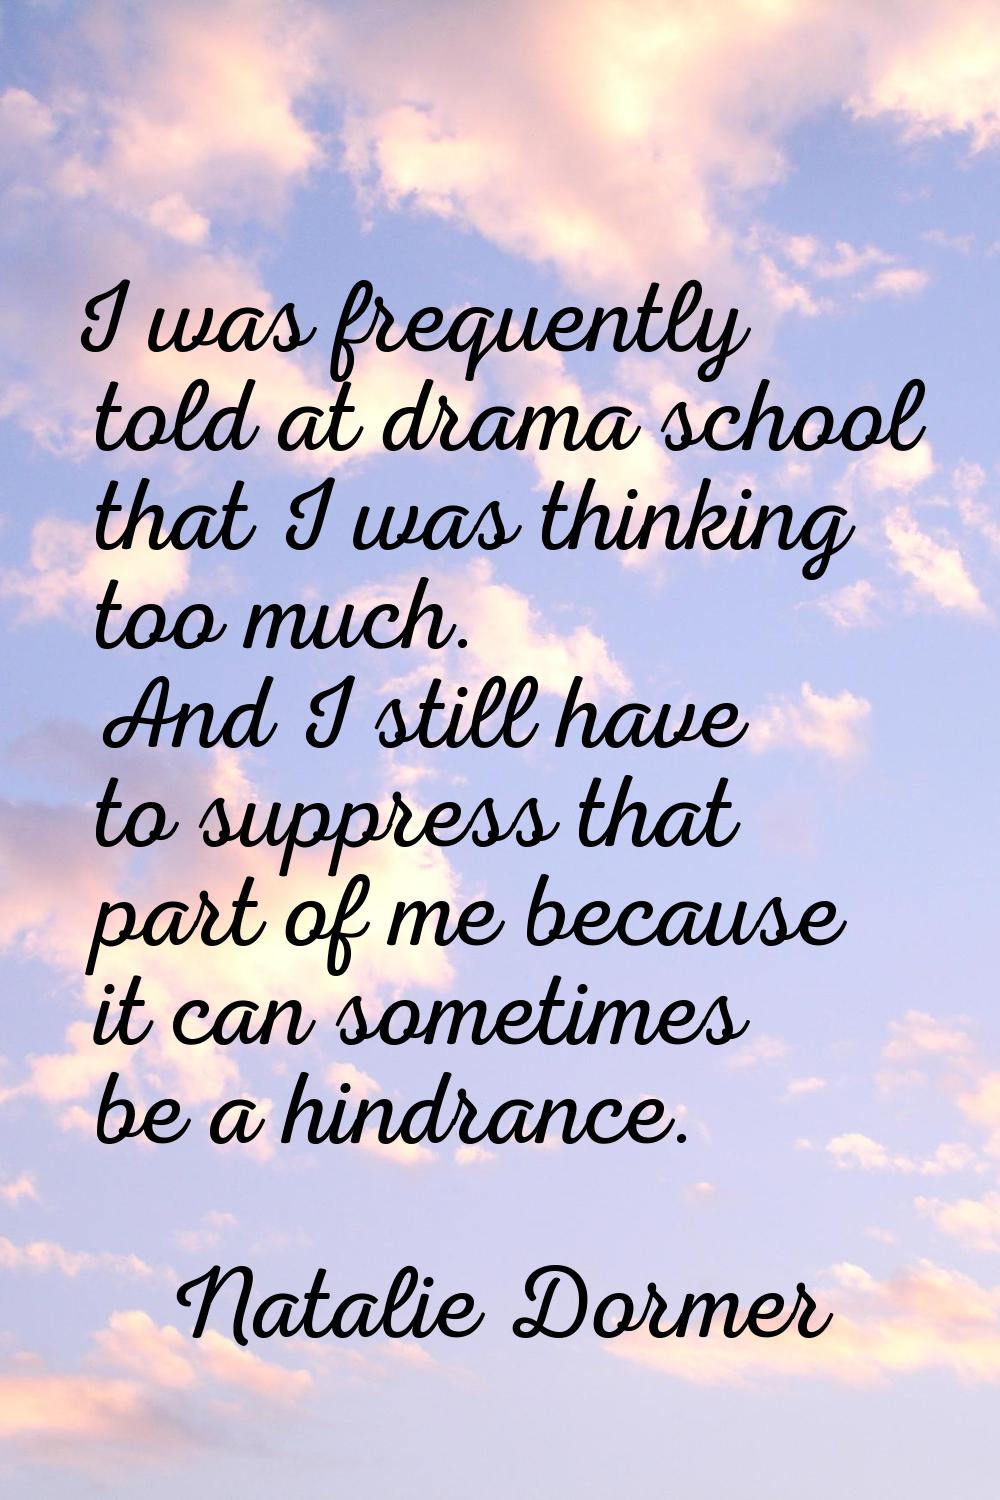 I was frequently told at drama school that I was thinking too much. And I still have to suppress th